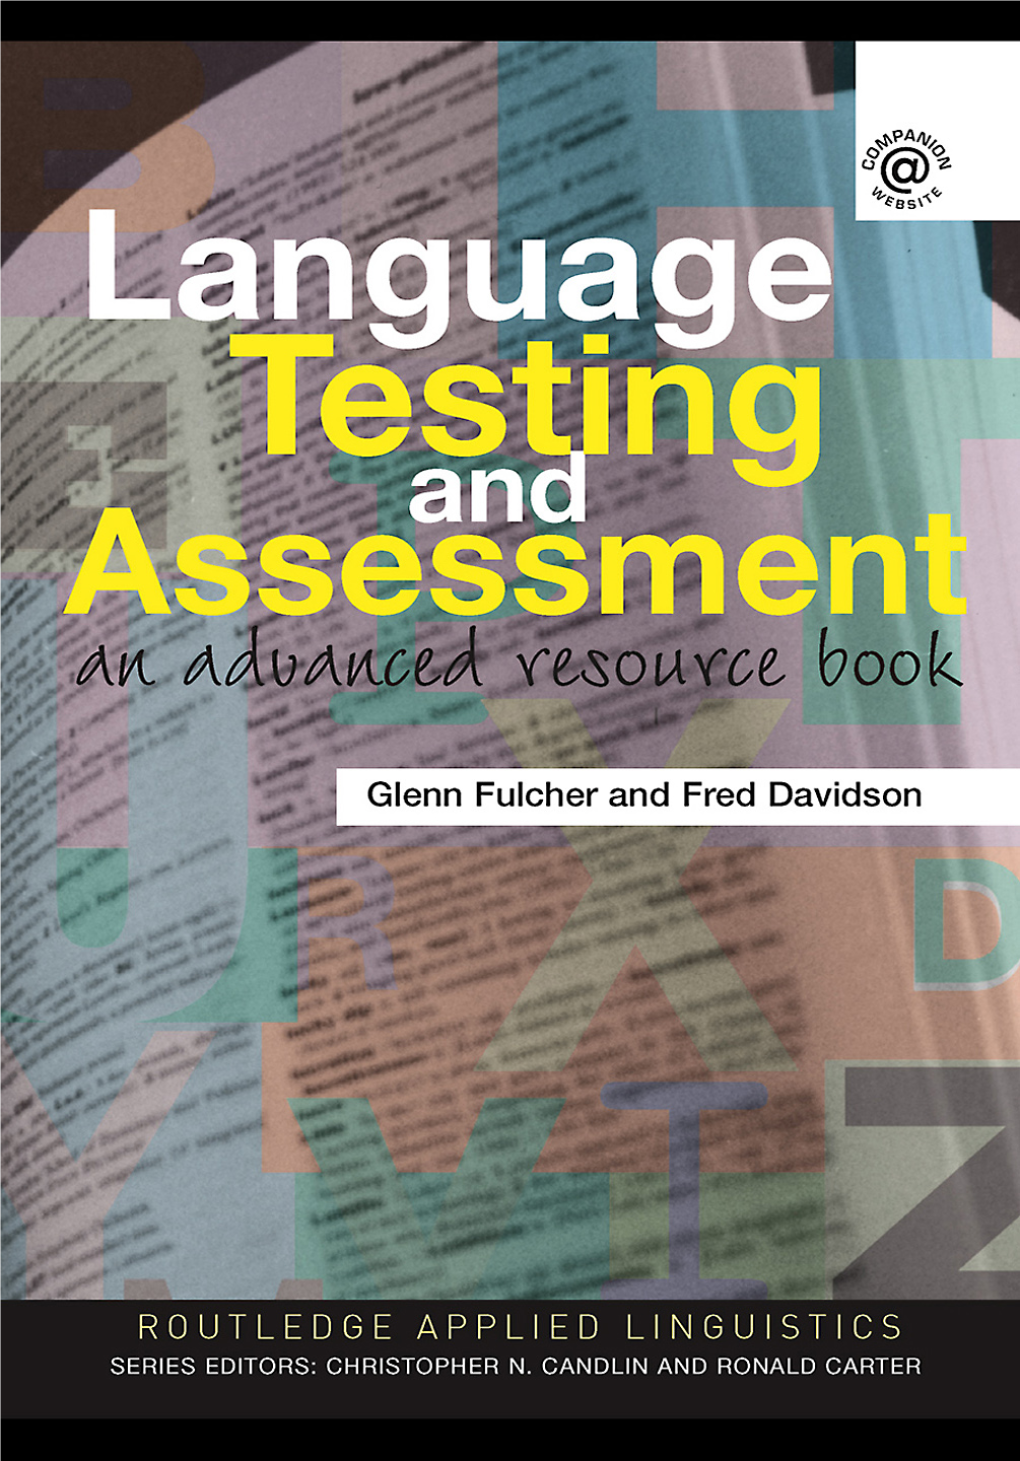 Language Testing and Assessment: an Advanced Resource Book Glenn Fulcher and Fred Davidson Language Testing and Assessment an Advanced Resource Book